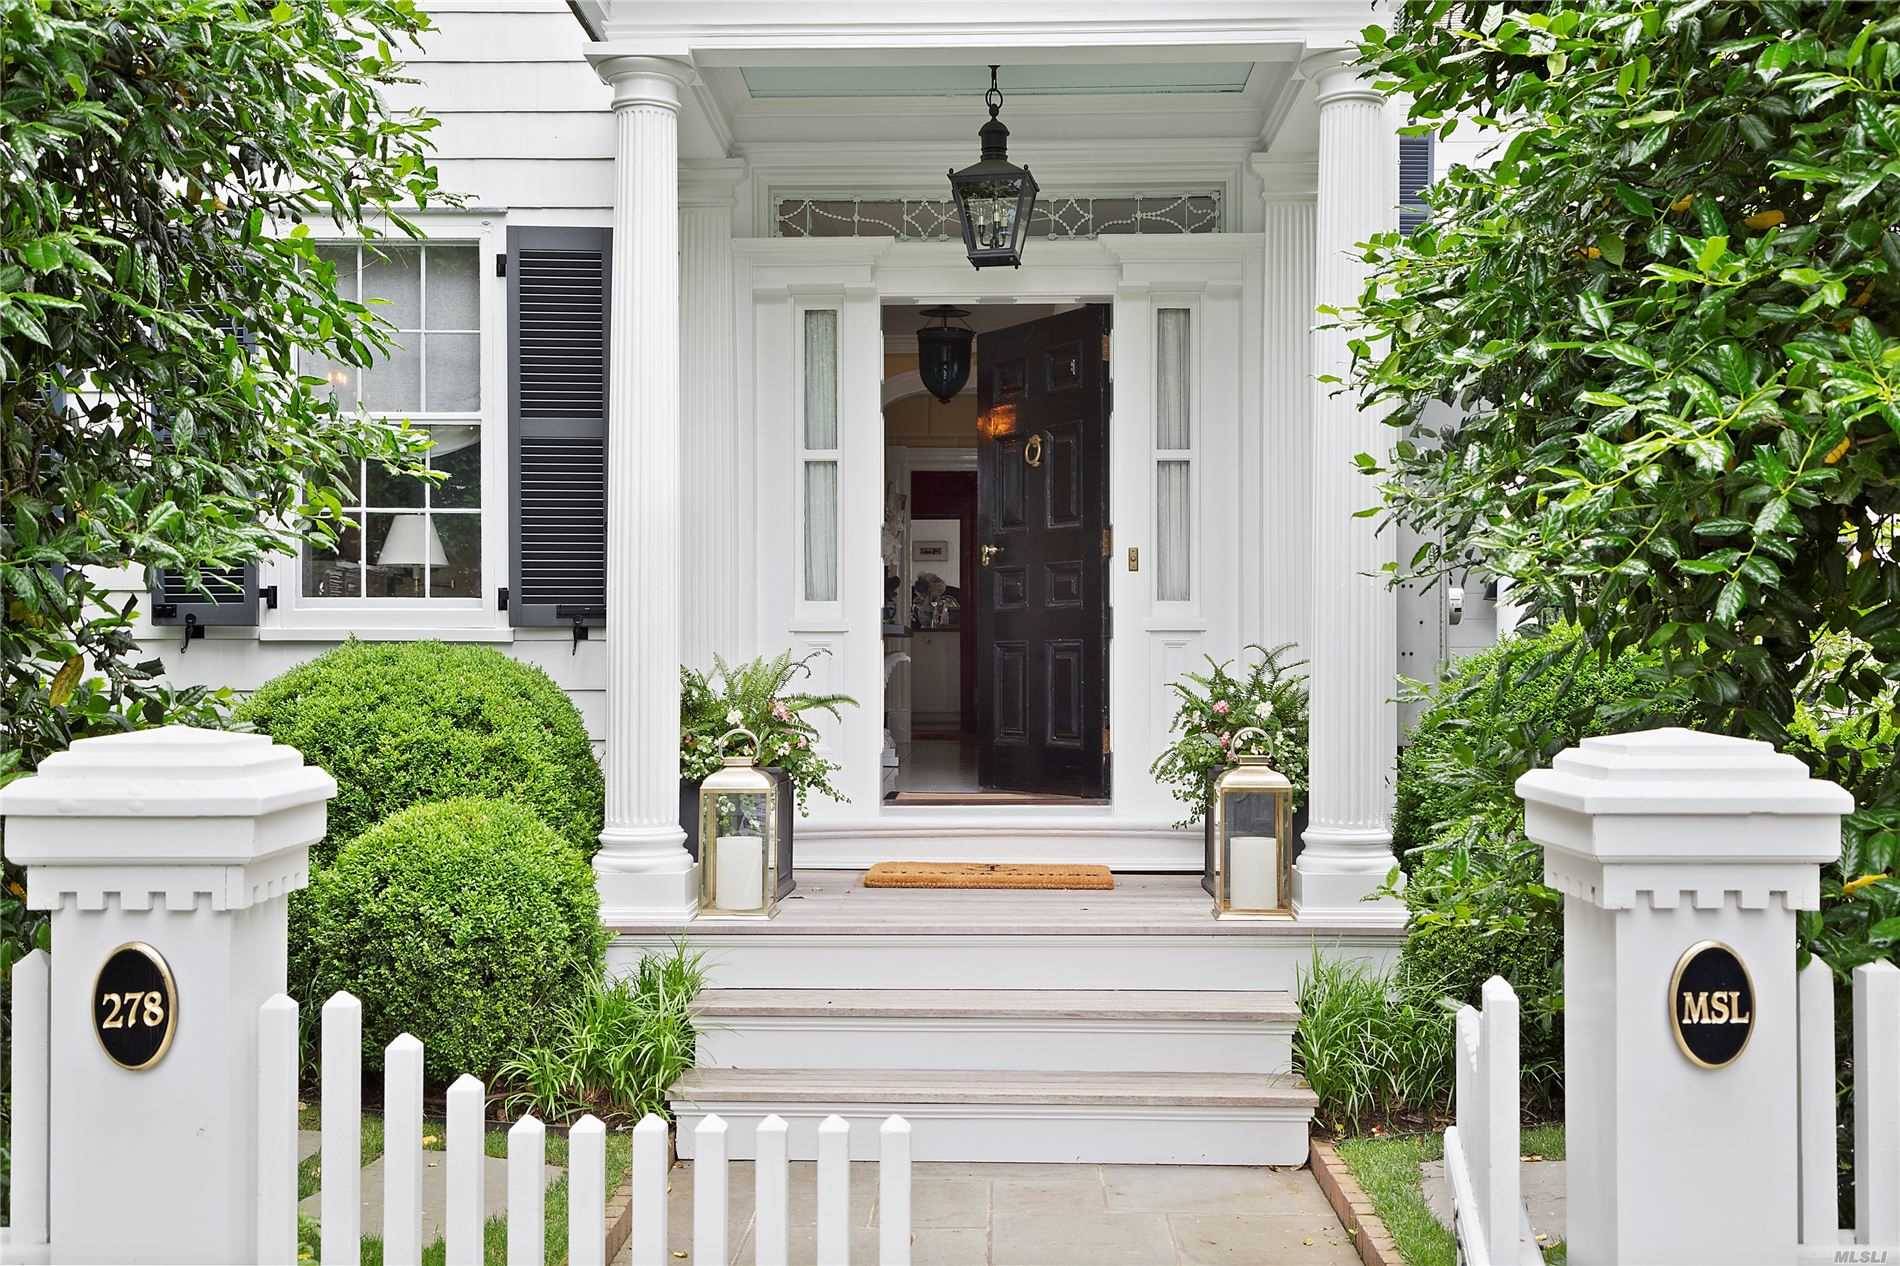 A Main Street masterpiece, this original bespoke Captains House in Sag Harbor is a home of which dreams are made.